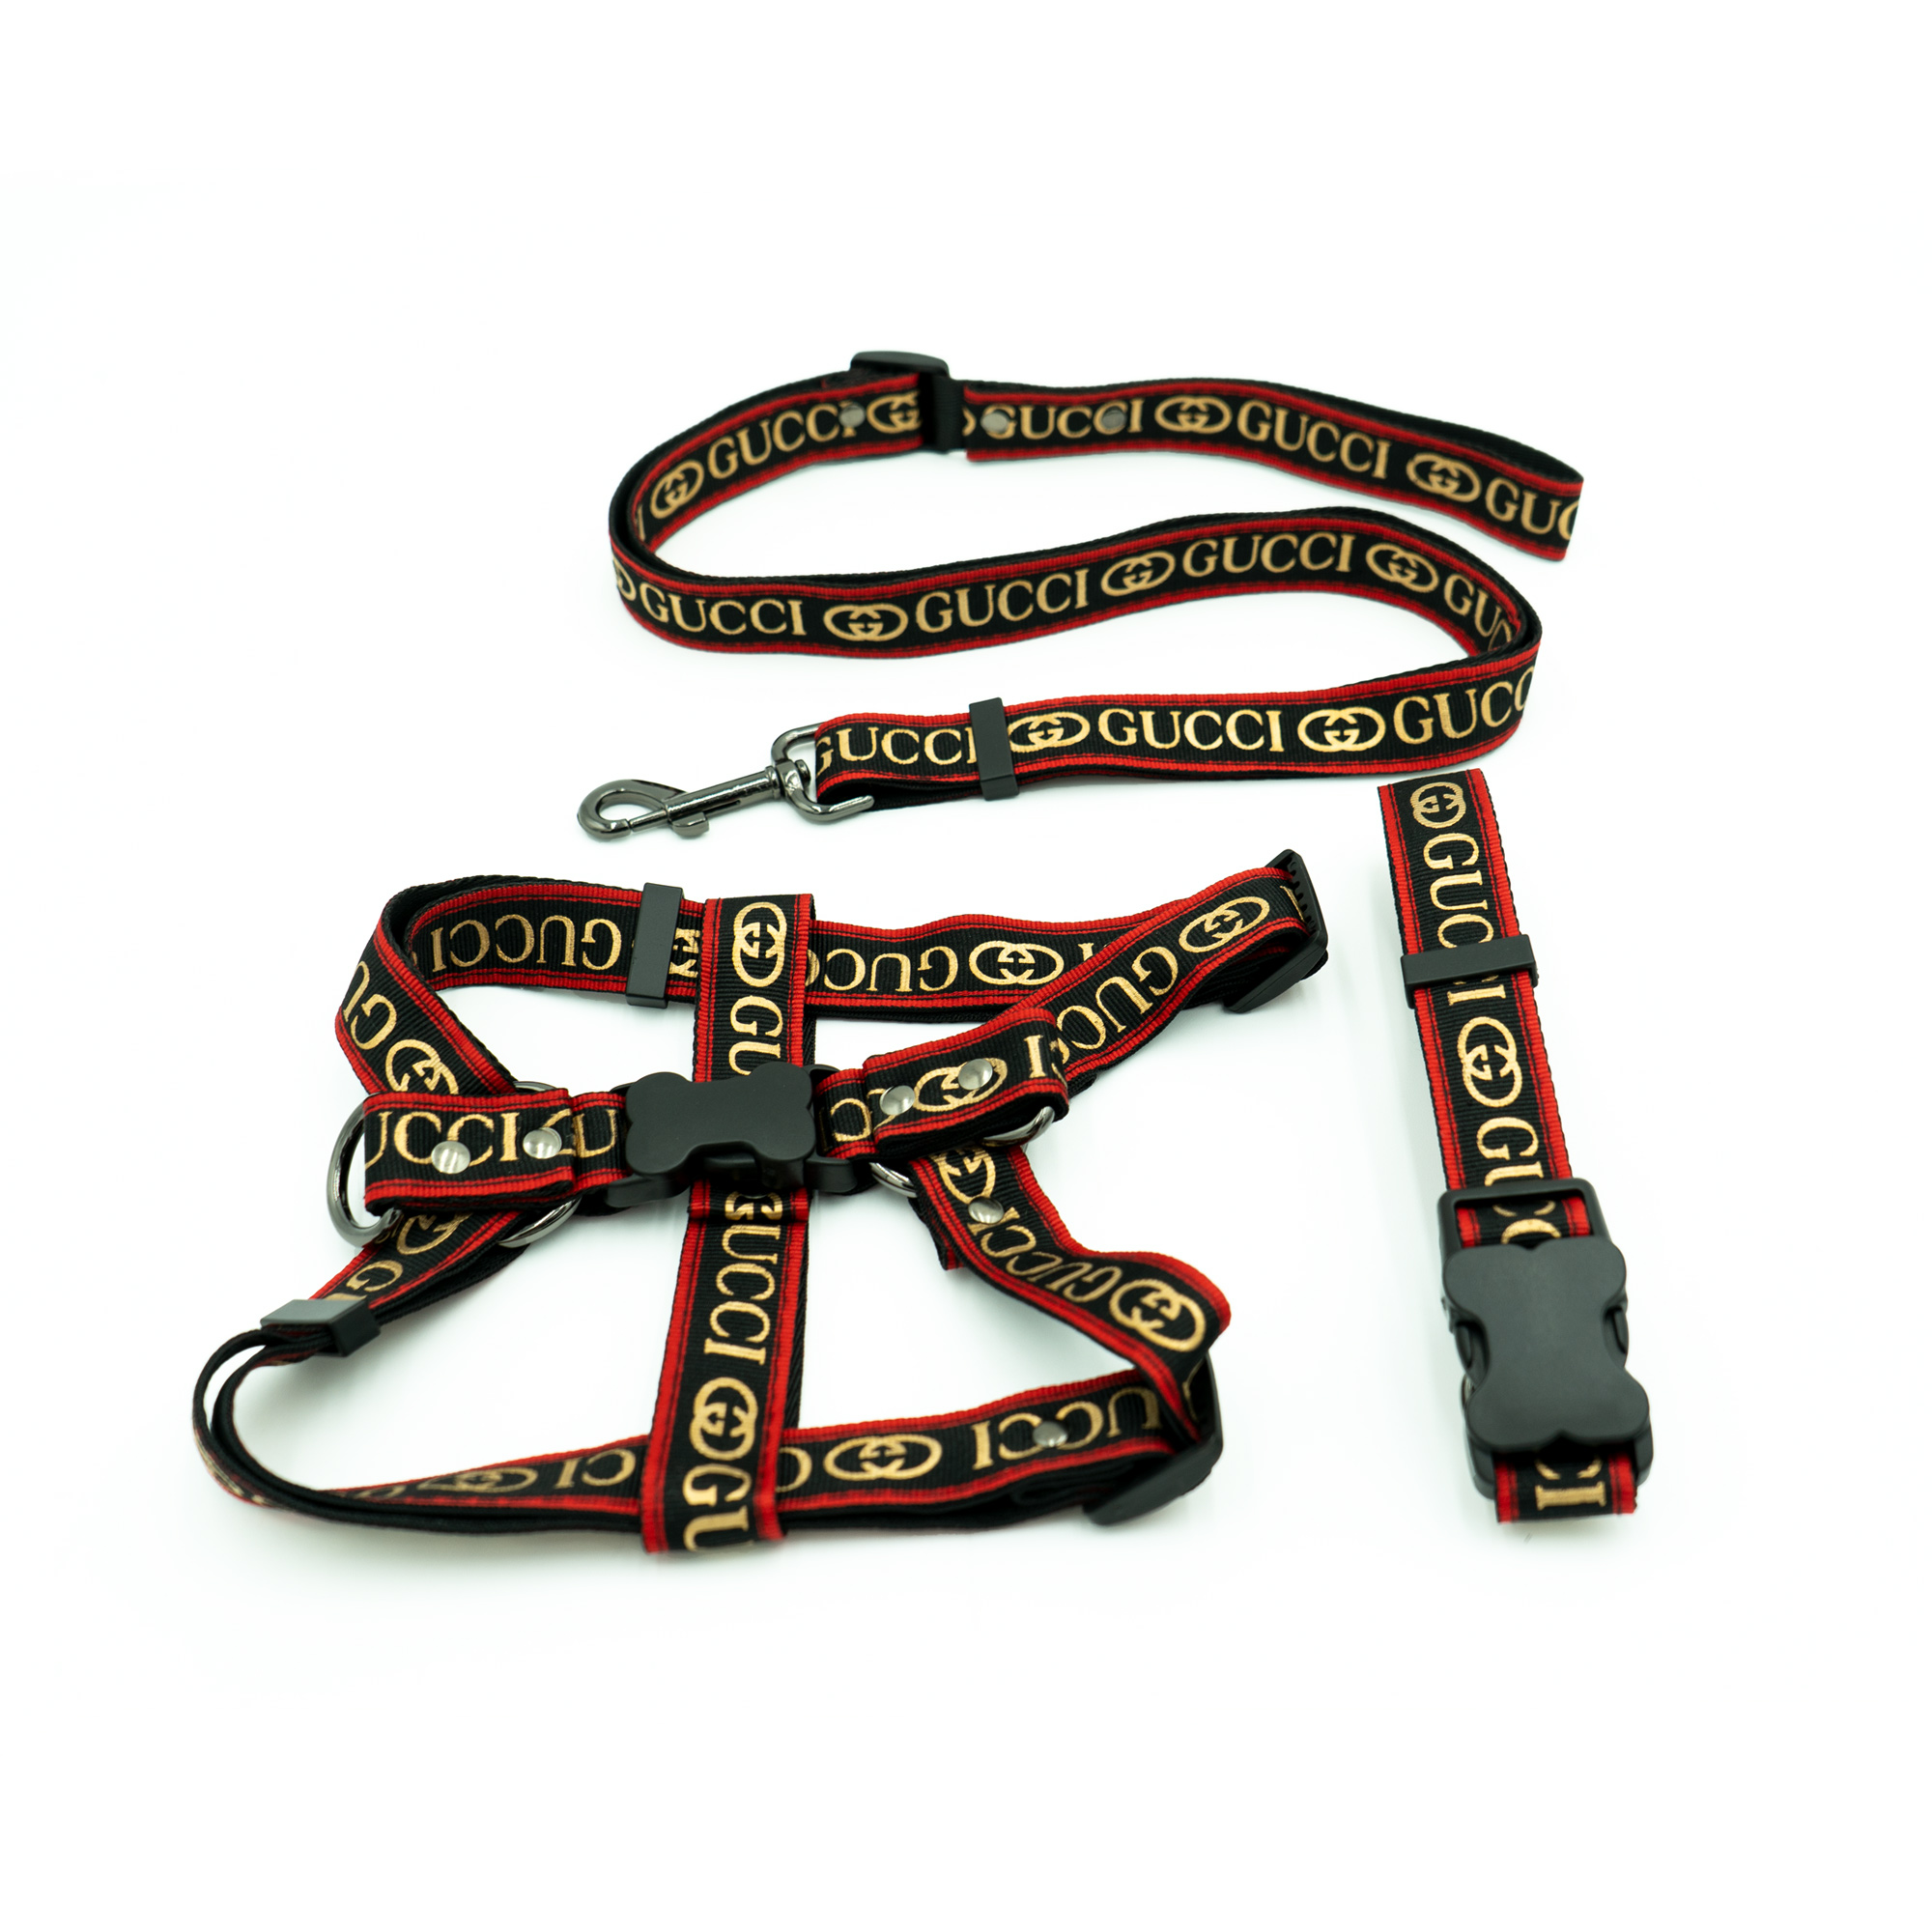 Classic Gucci Monogram Inspired Harness and Leash Set